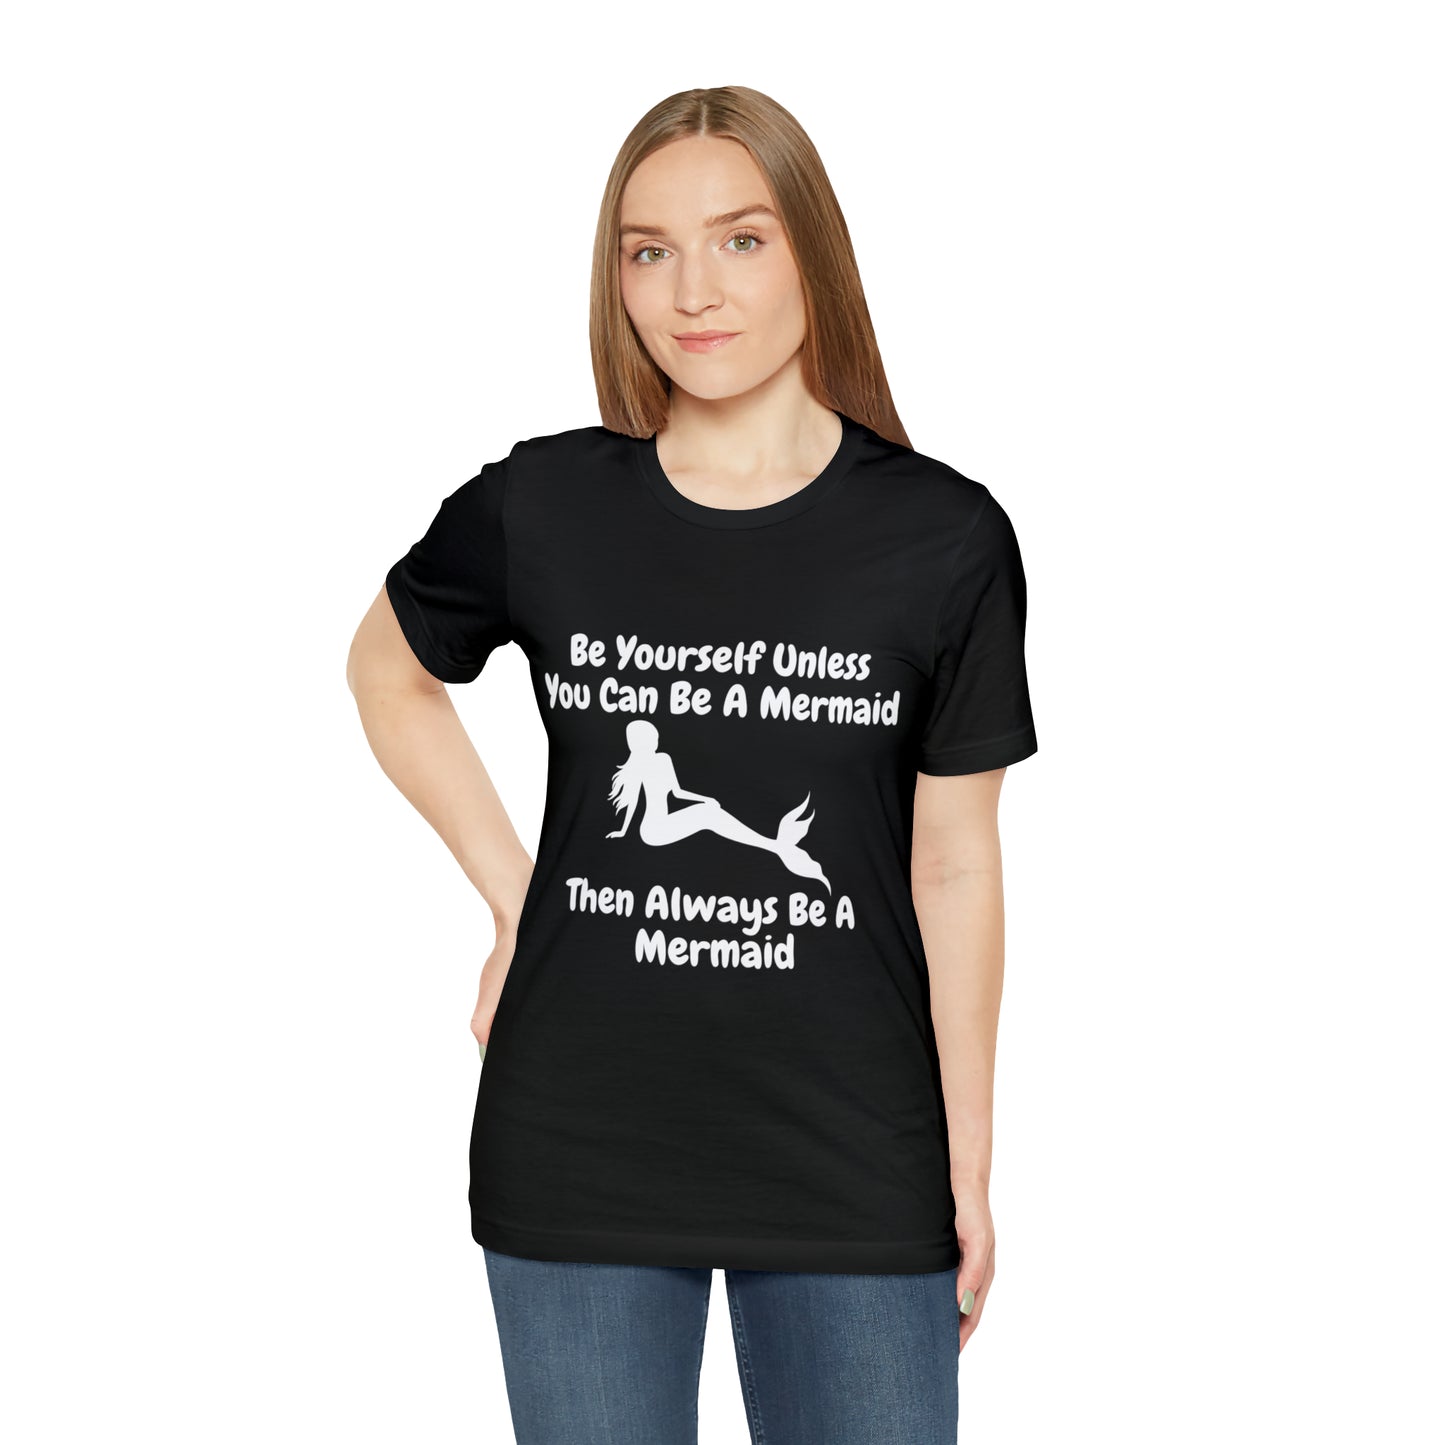 Be Yourself Unless You Can Be A Mermaid T-Shirt